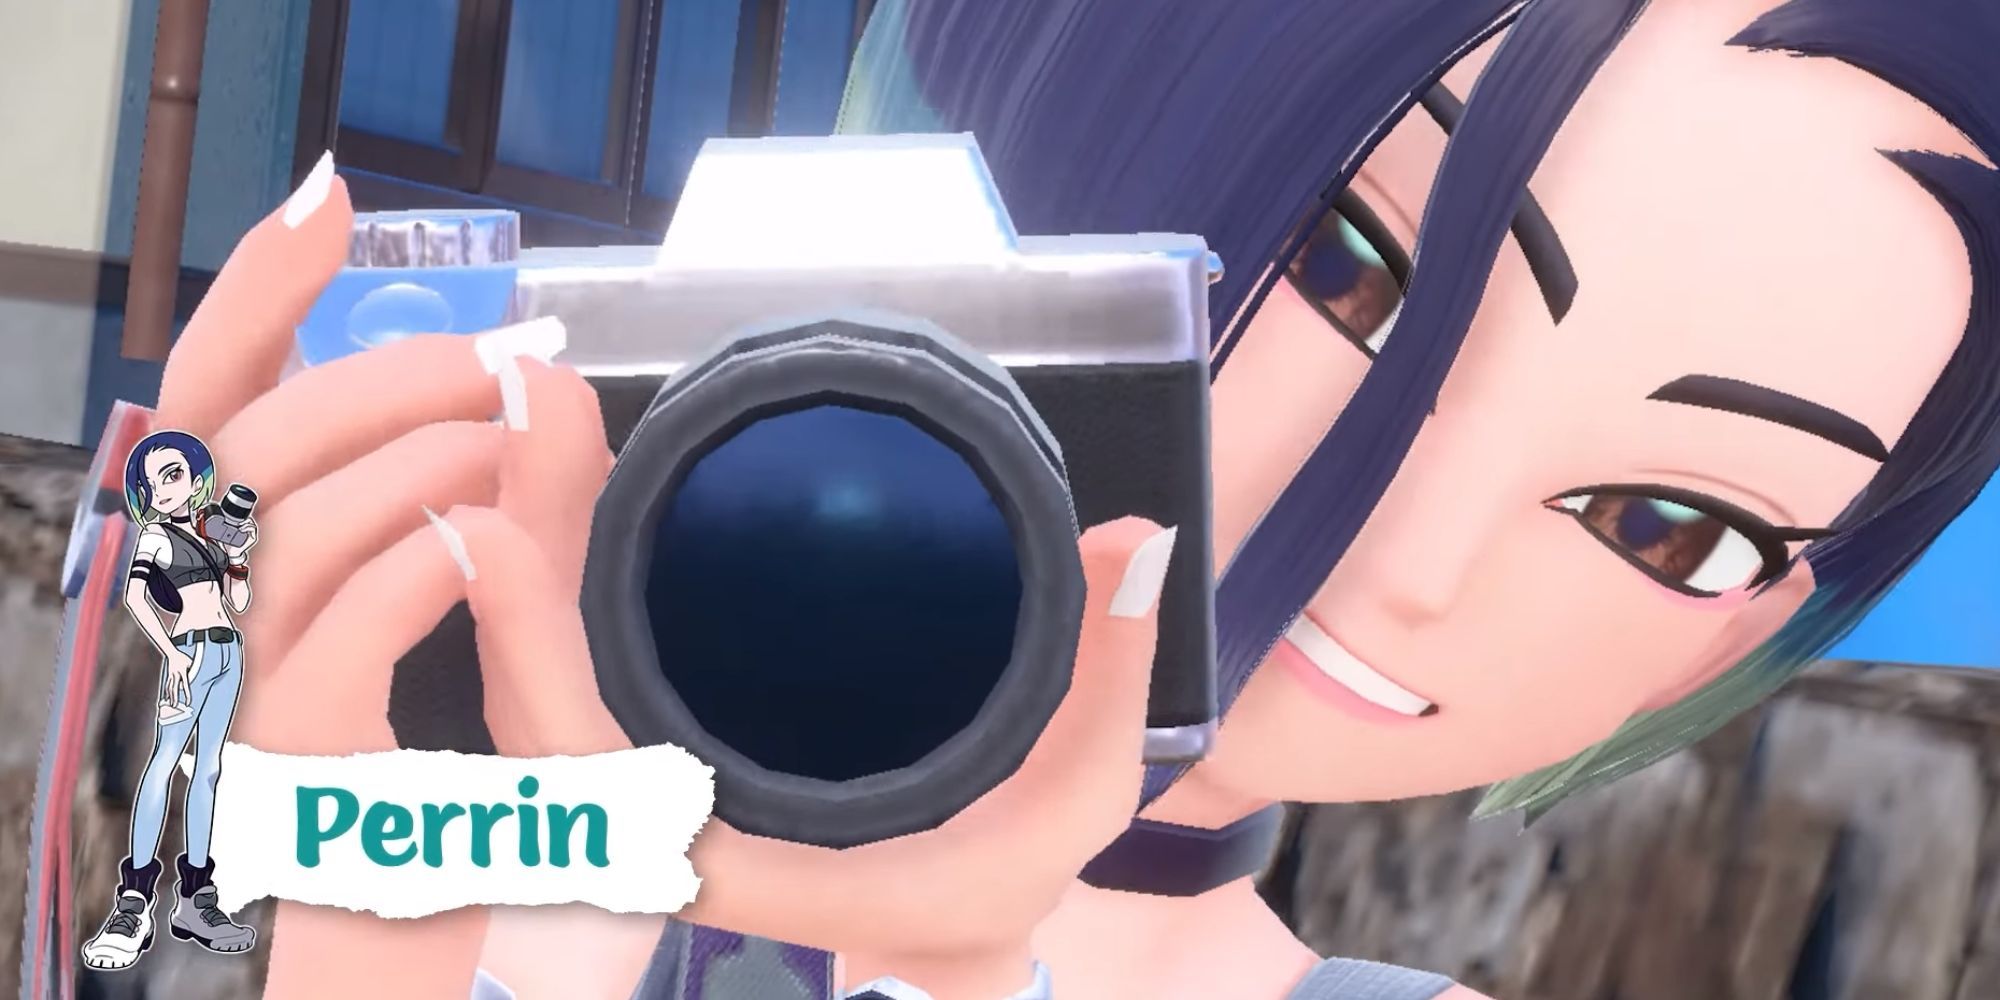 Perrin, a photographer, smiles at the camera in a new Pokemon trailer. She has dark hair with a green highlight.